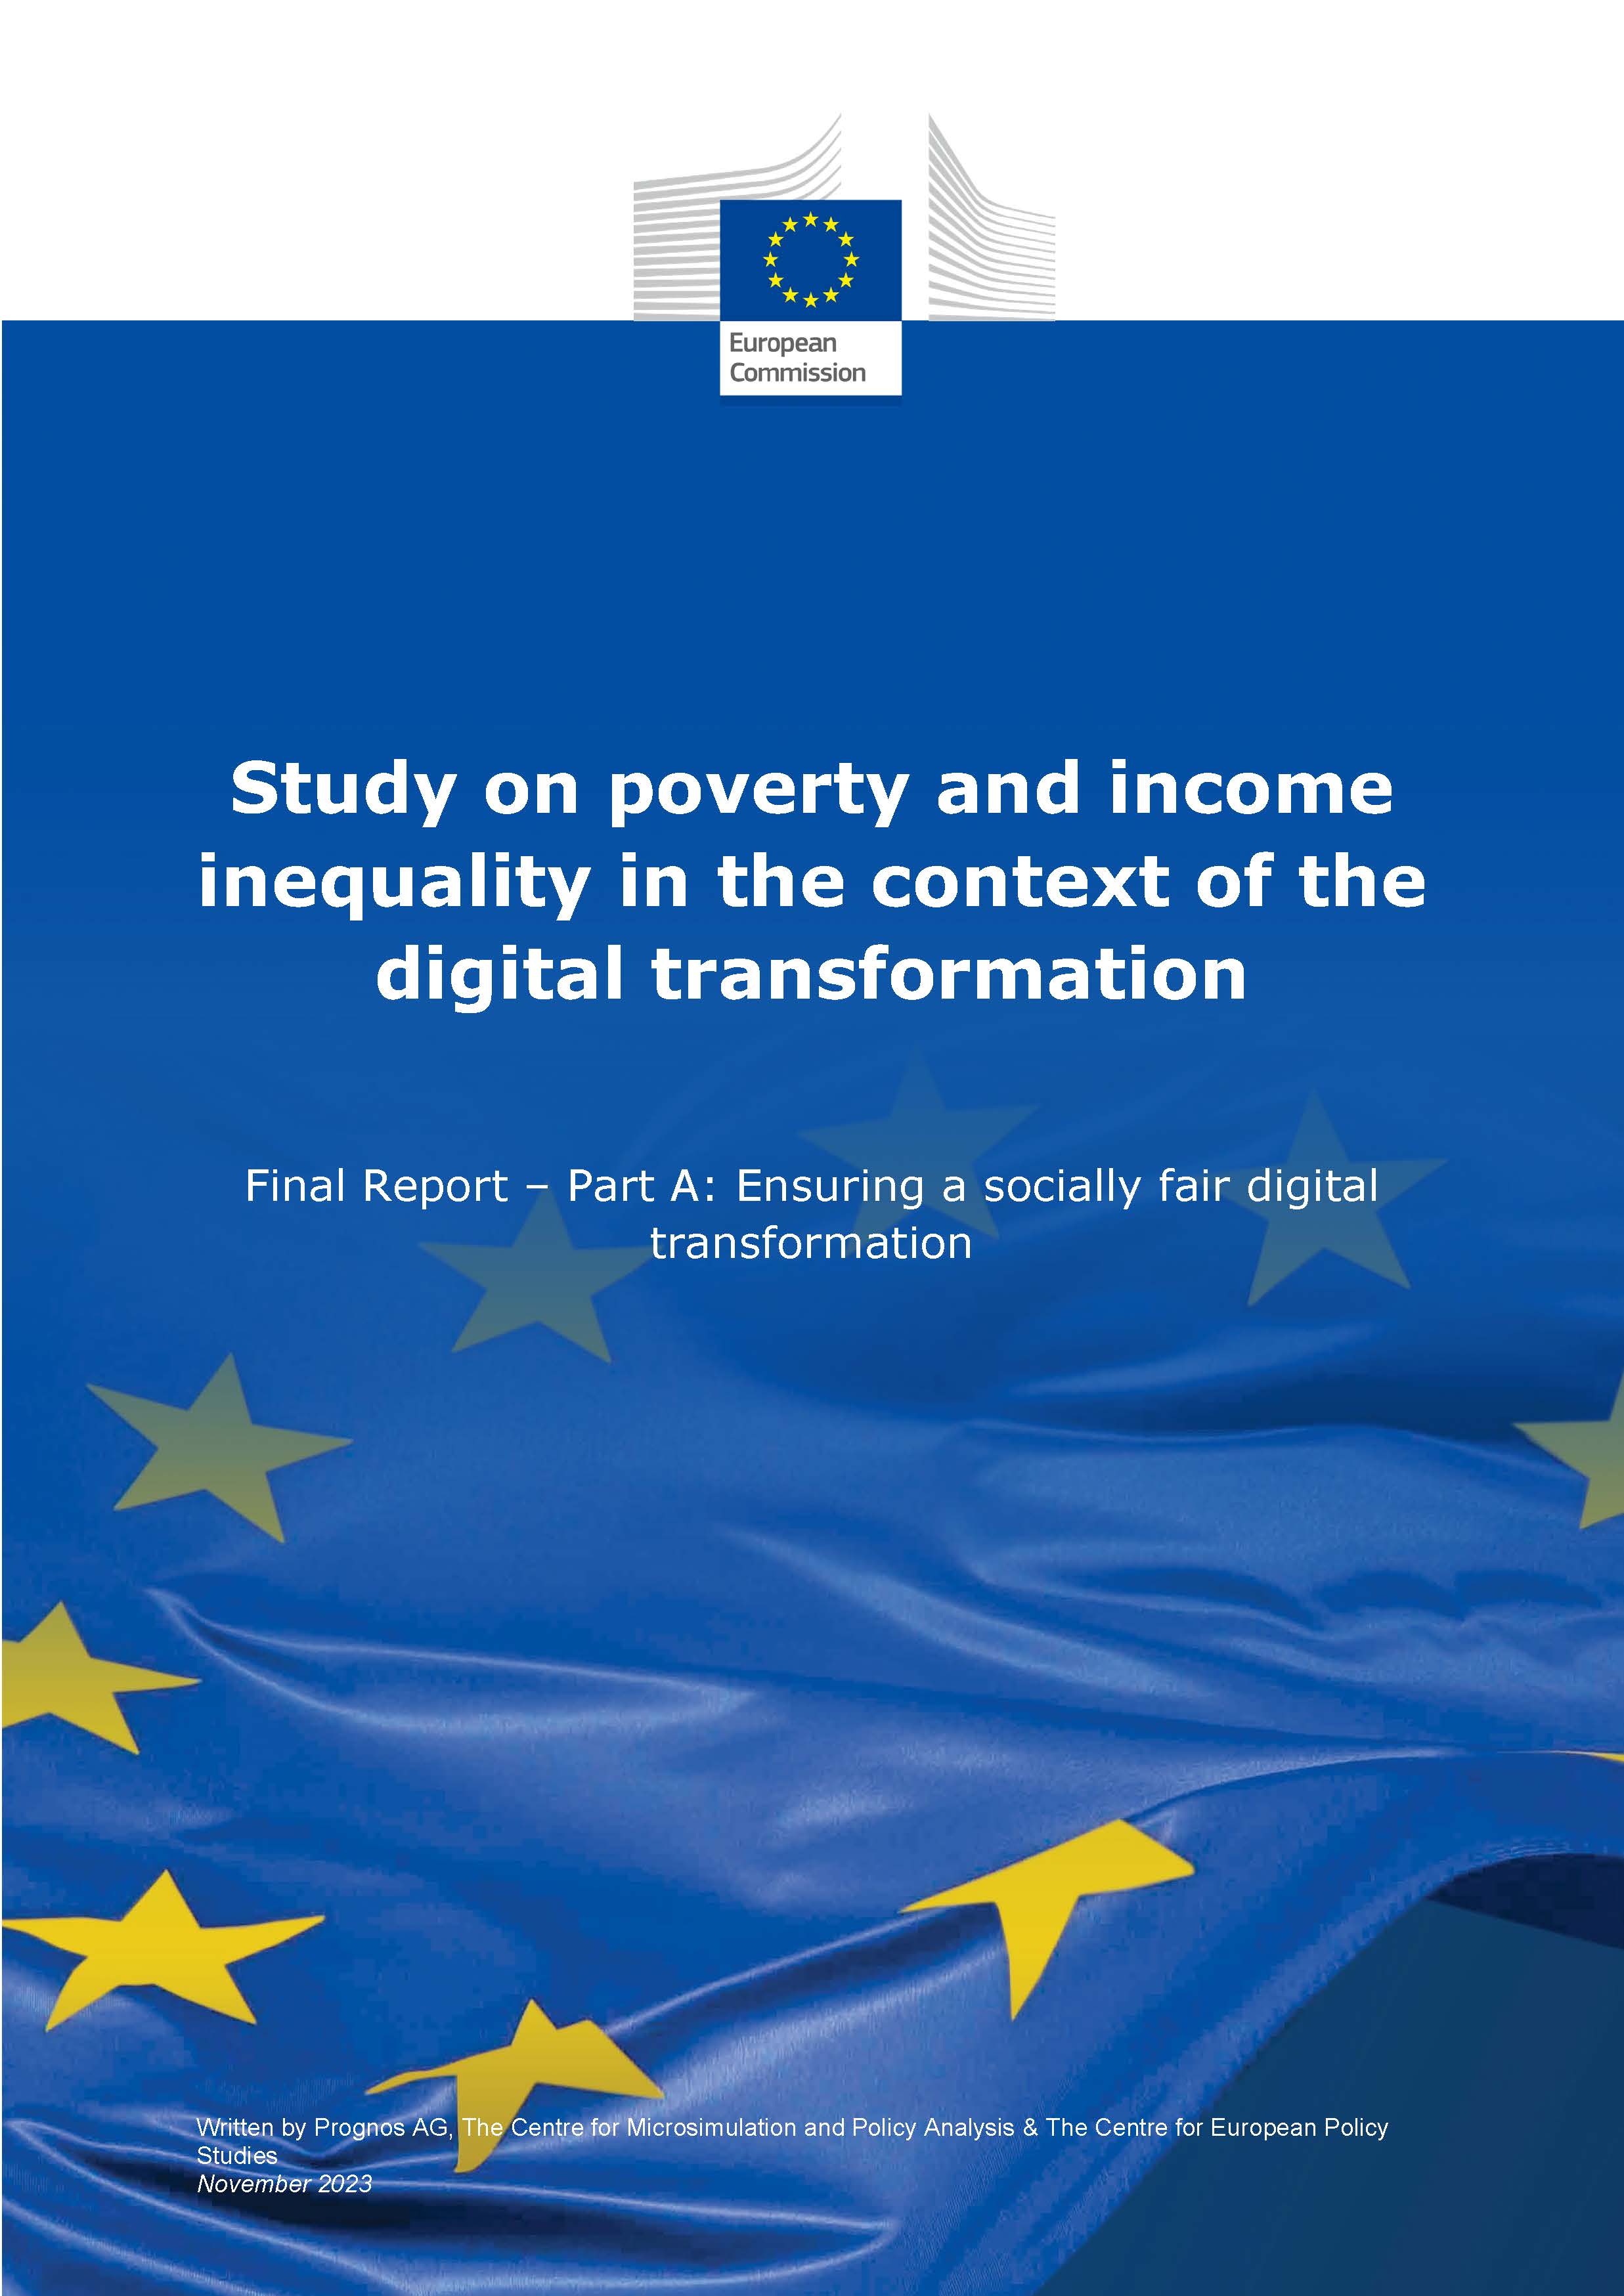 Study on poverty and income inequality in the context of the digital transformation